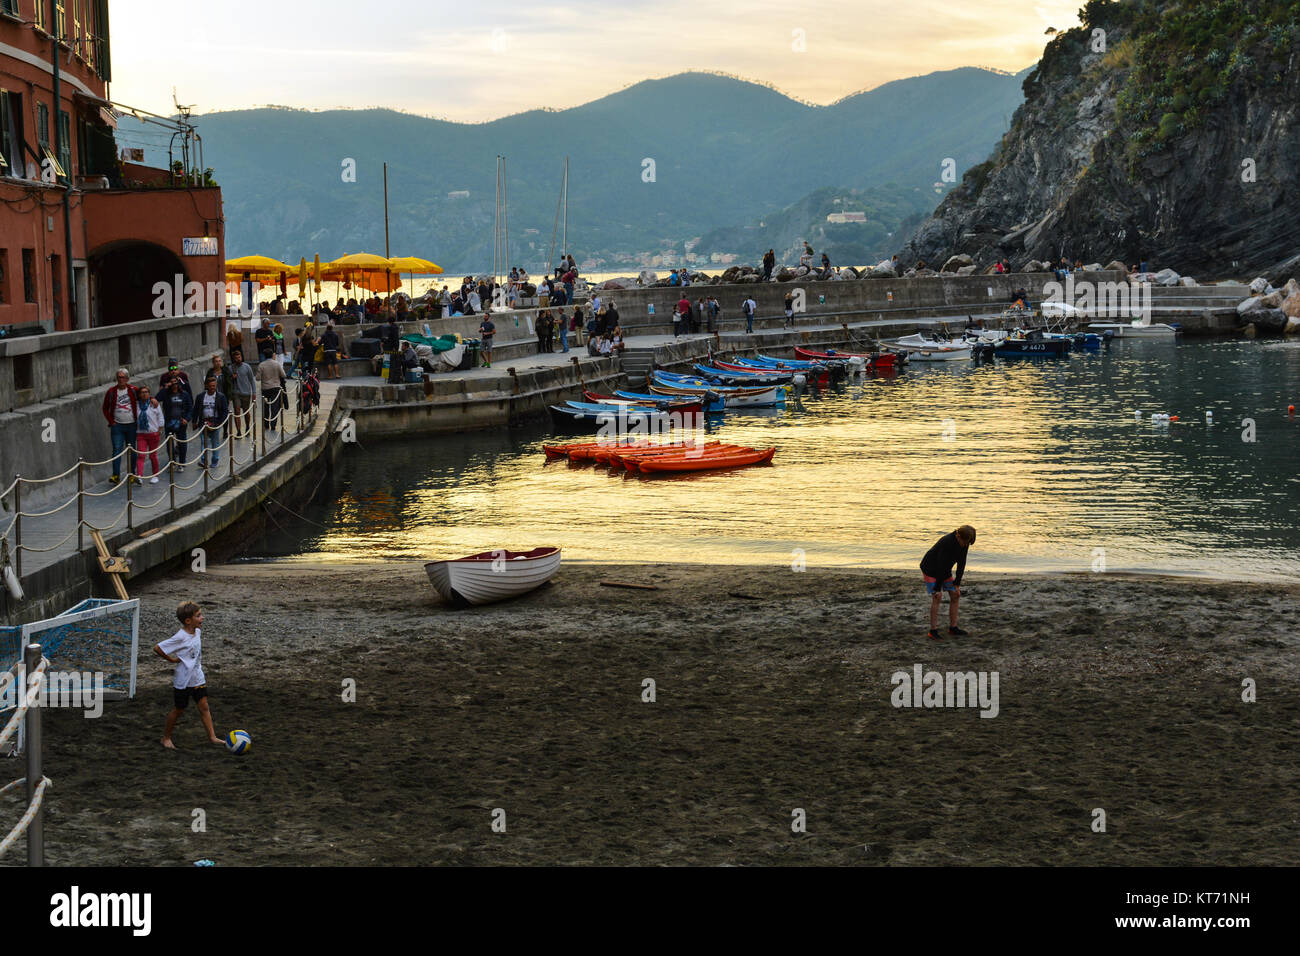 Local Italian children play football on the sandy beach at Vernazza as tourists watch at dusk along the Cinque Terre coast of Italy Stock Photo